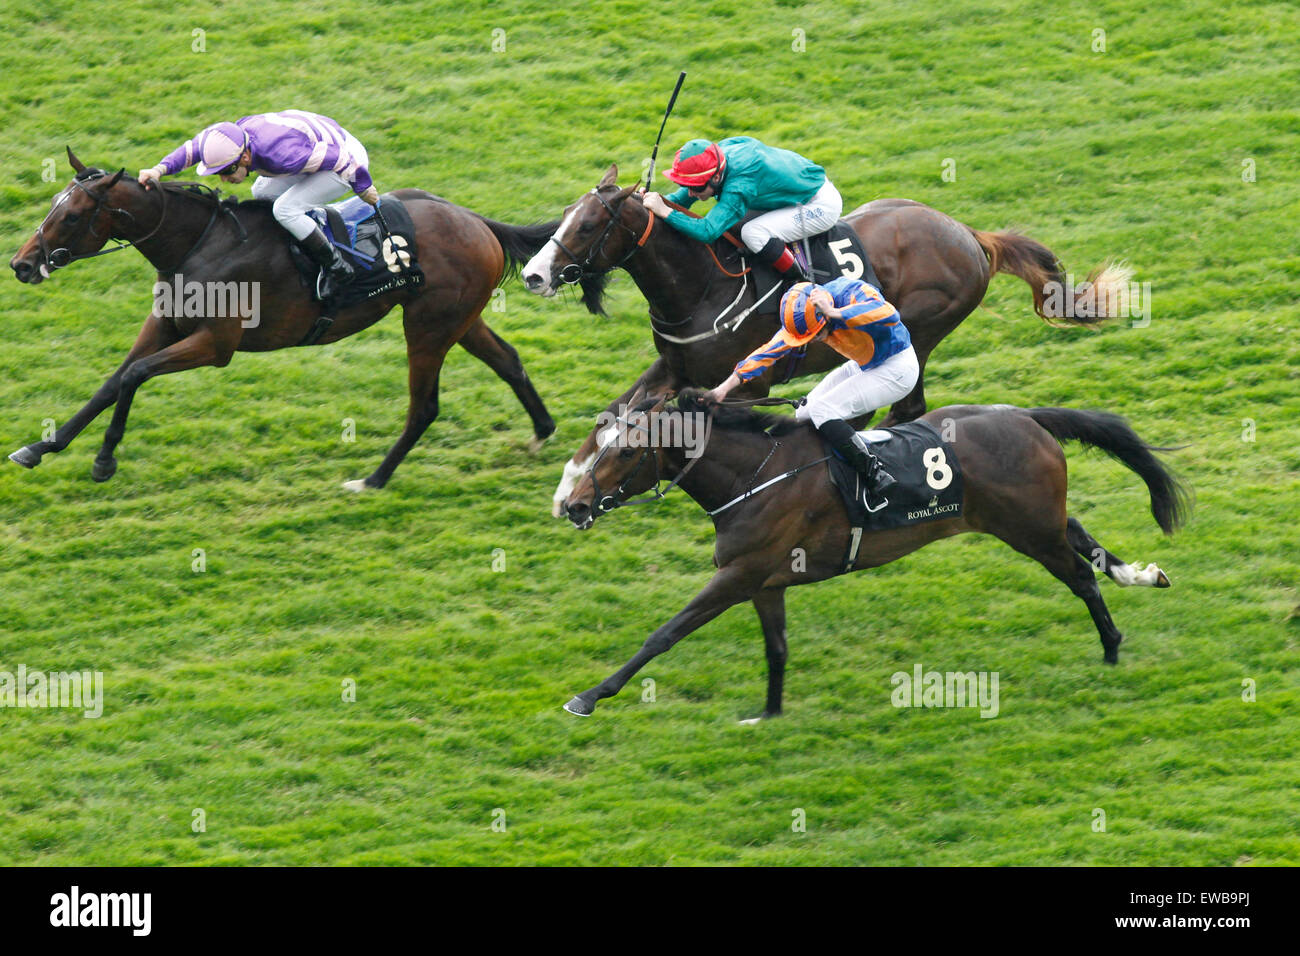 20.06.2015 - Ascot; Suits You ridden by Christian Demuro (No.6) wins the Chesham Stakes (Listed Race). Second place: Ballydoyle ridden by Ryan Moore (No.8). Third place: Sixth Sense ridden by Charles Bishop (No.5). Credit: Lajos-Eric Balogh/turfstock.com Stock Photo